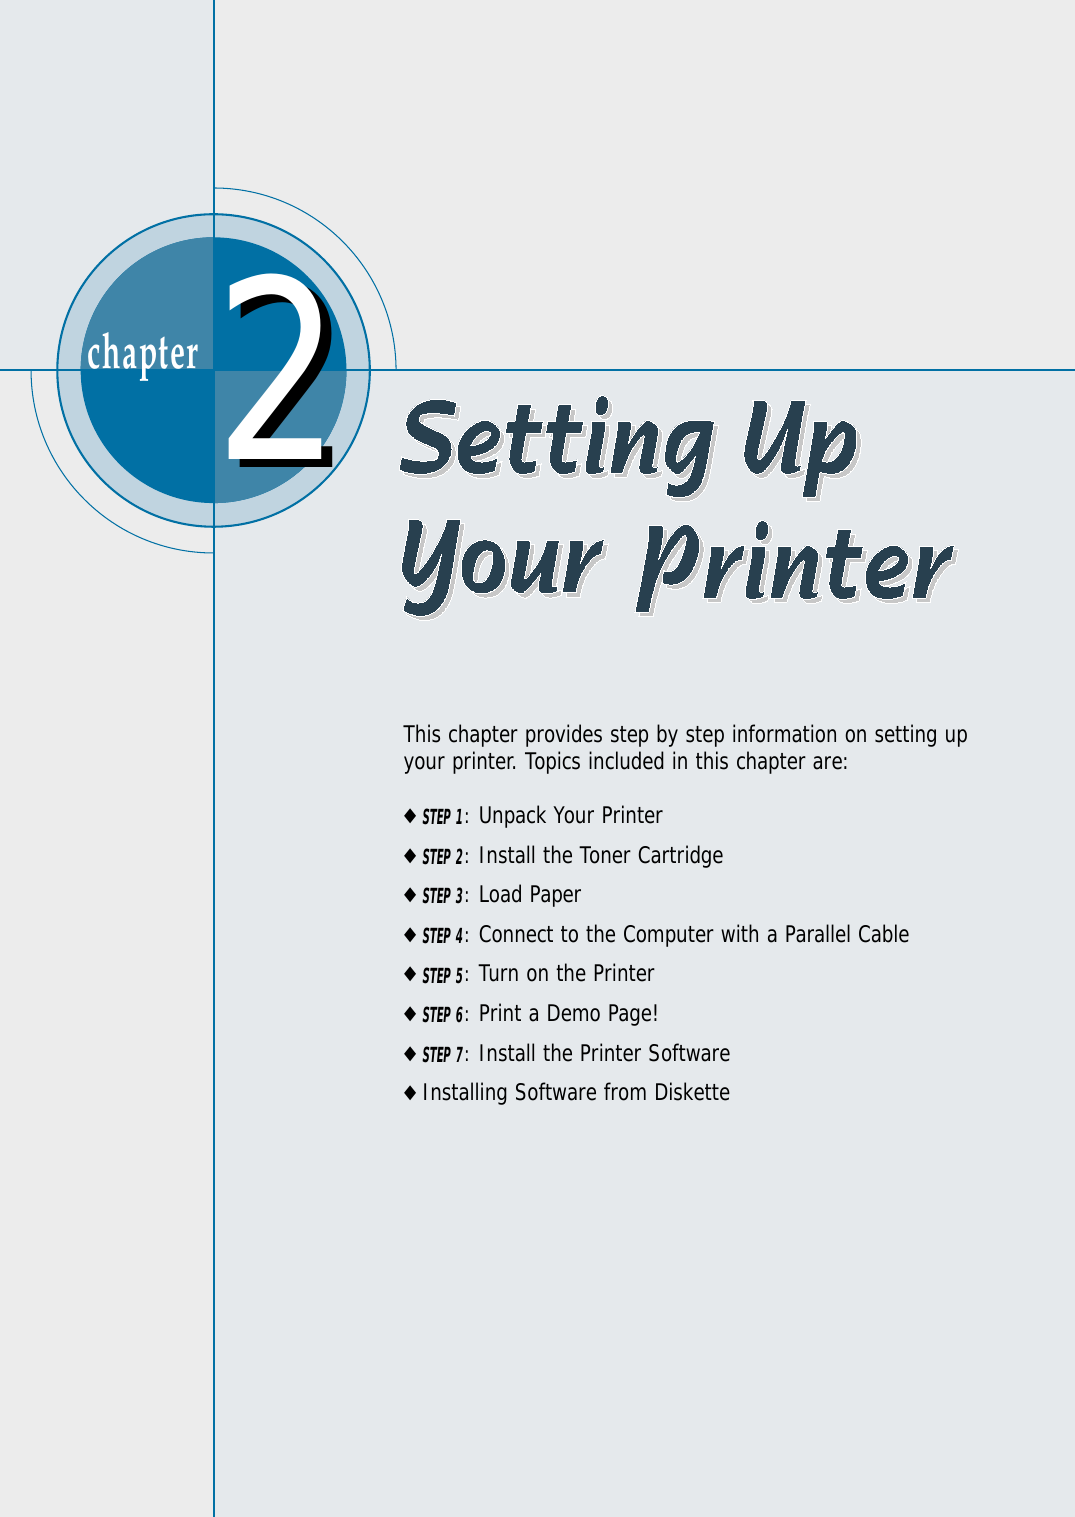 chapter  This chapter provides step by step information on setting upyour printer. Topics included in this chapter are:◆STEP 1:Unpack Your Printer◆STEP 2:Install the Toner Cartridge◆STEP 3:Load Paper◆STEP 4:Connect to the Computer with a Parallel Cable◆STEP 5:Turn on the Printer◆STEP 6:Print a Demo Page!◆STEP 7:Install the Printer Software◆Installing Software from Diskette22